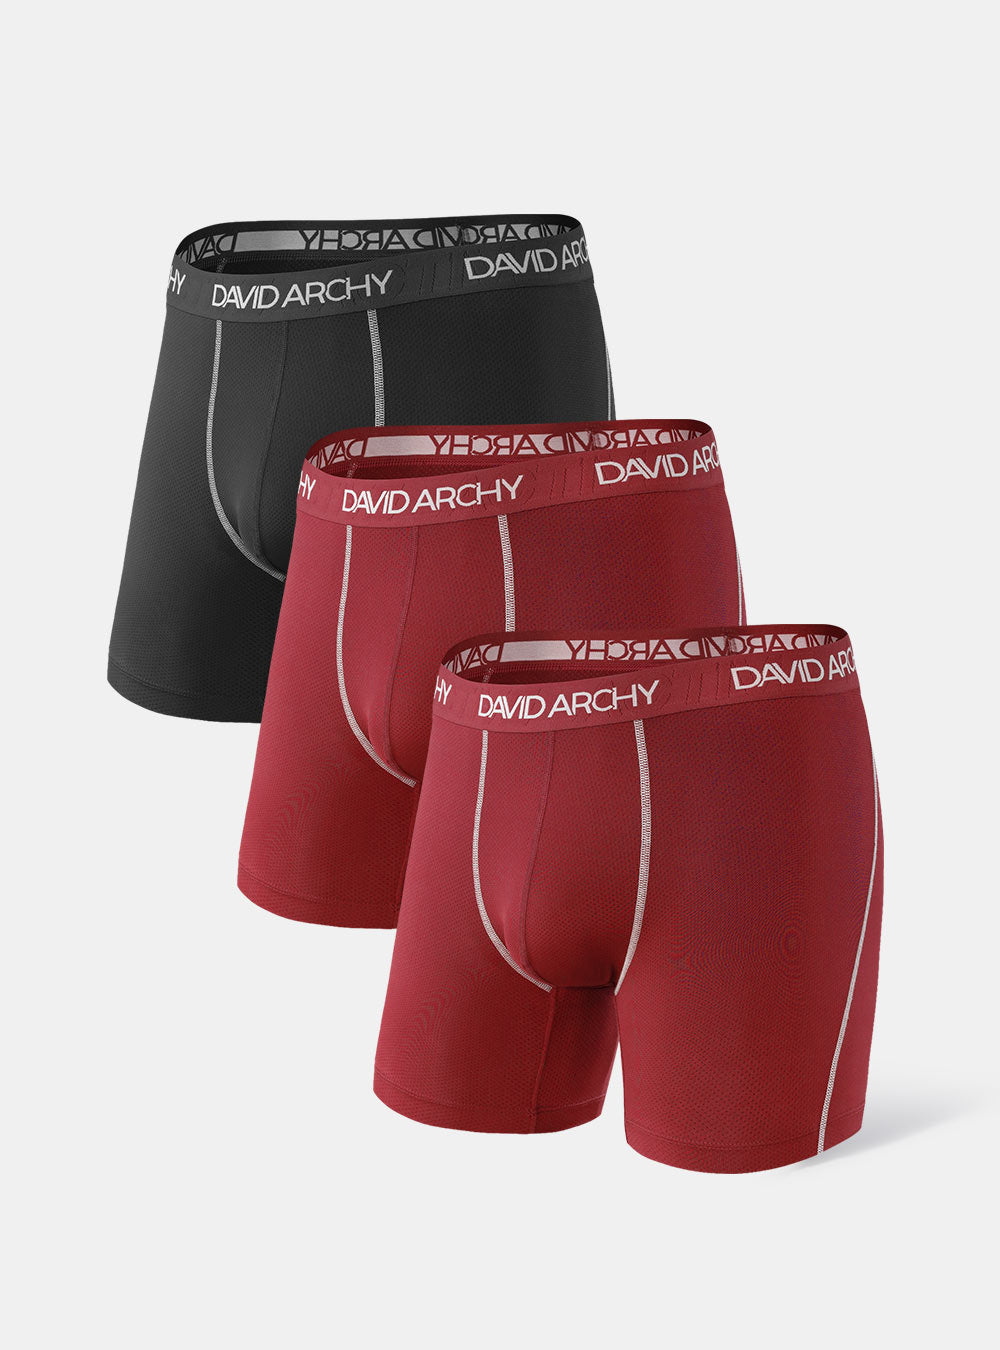 DAVID ARCHY Men's Boxer Briefs Comfy Soft Bamboo Rayon Underwear 3  Pack,Sizes S-XL 